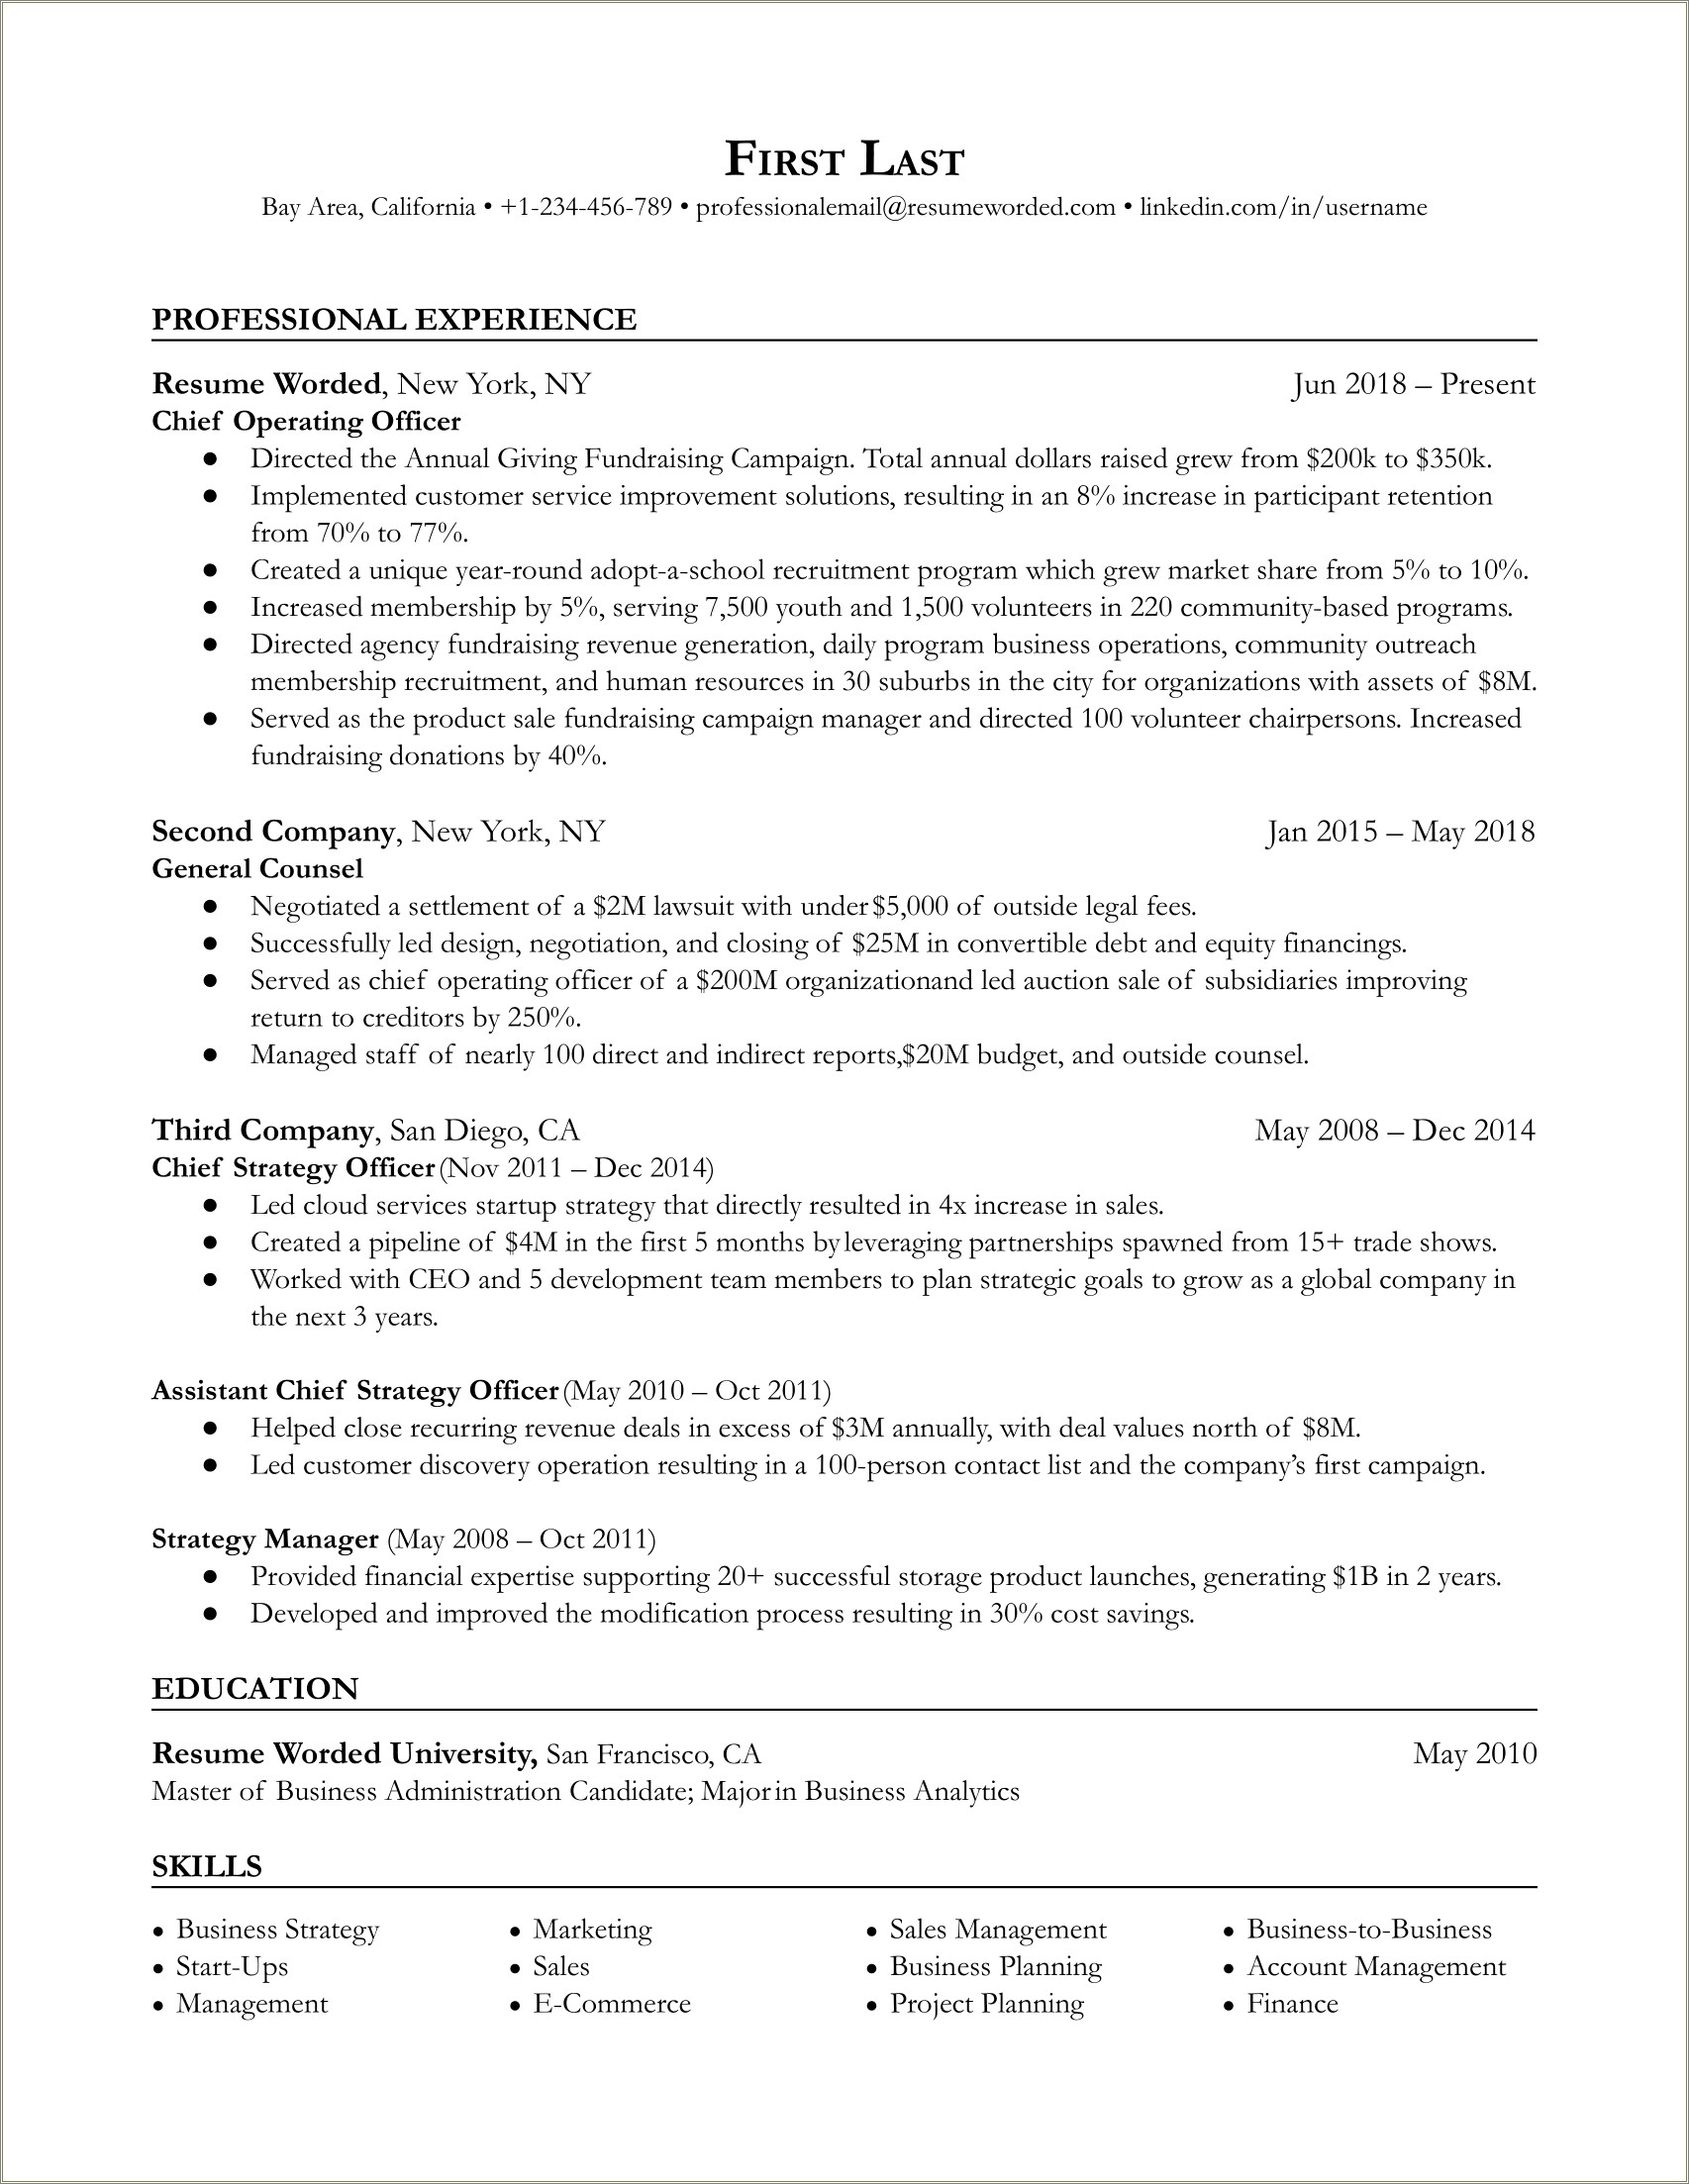 Private Equity Vice President Resume Sample